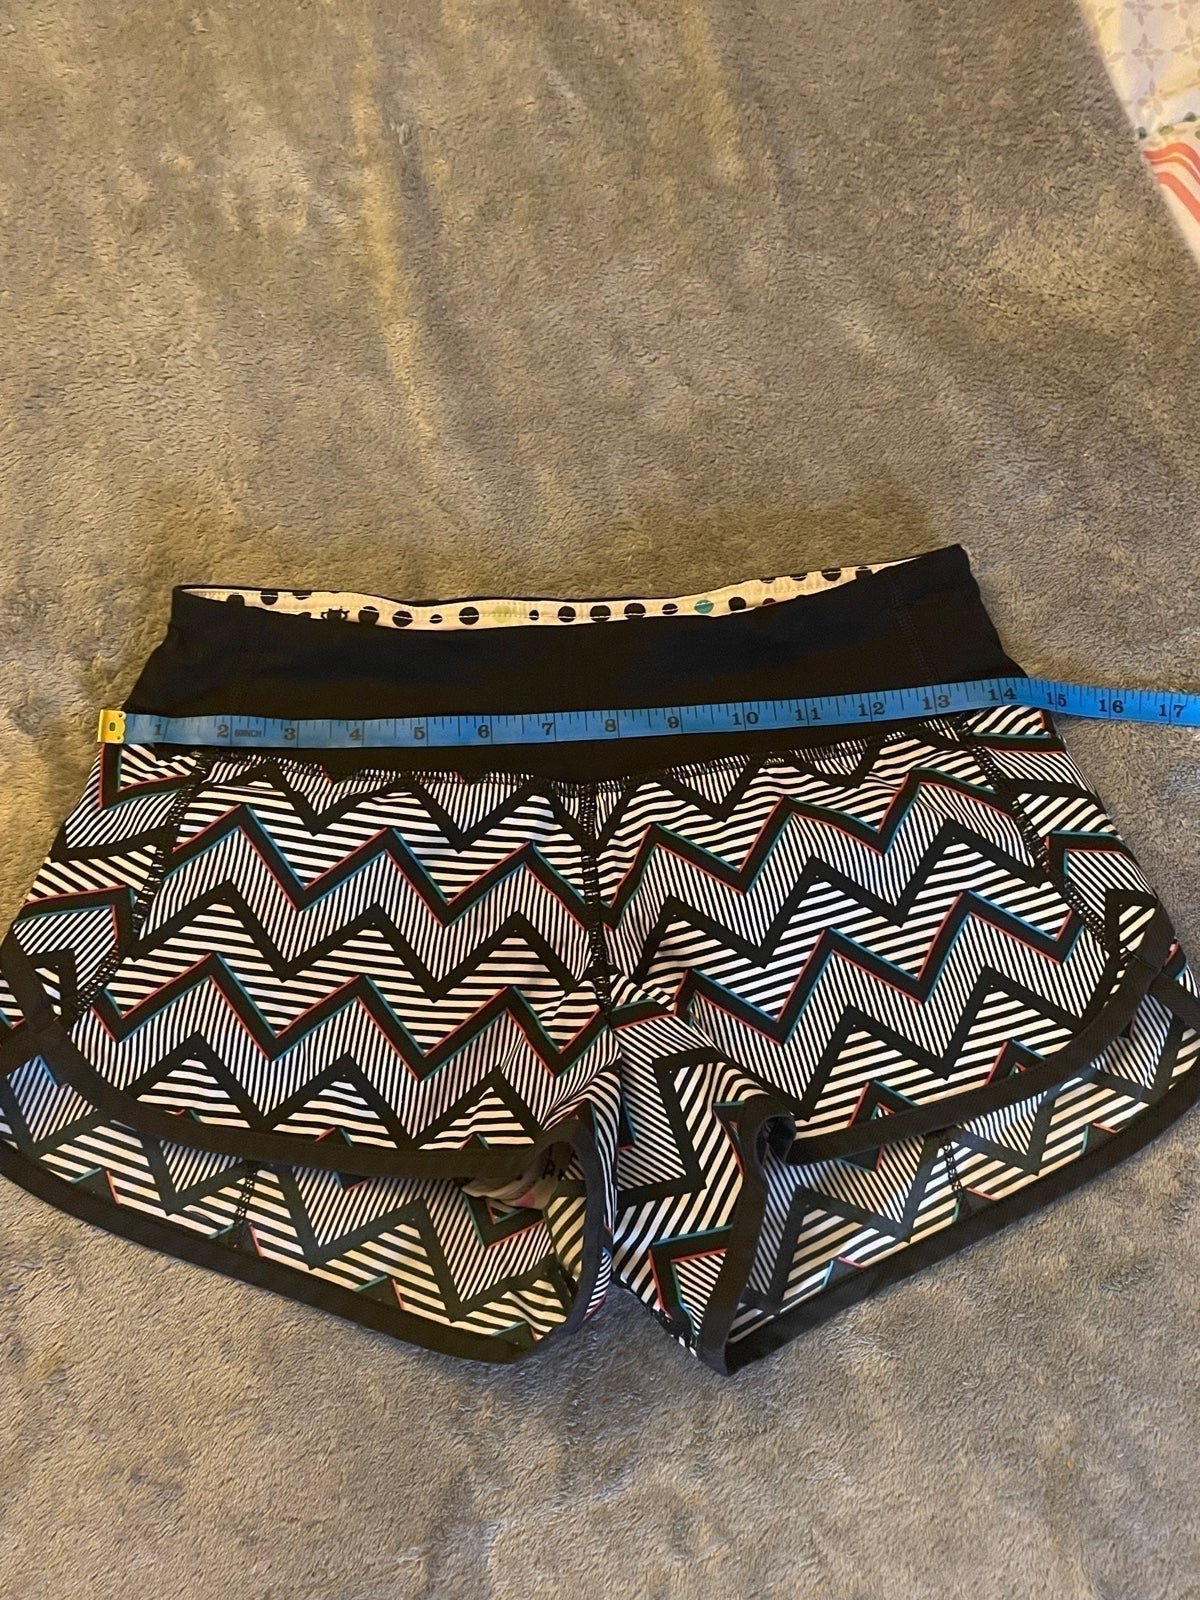 cheapest place to buy  Lululemon Speed Shorts Seawheeze 2014 size 2 in8V3veGS best sale